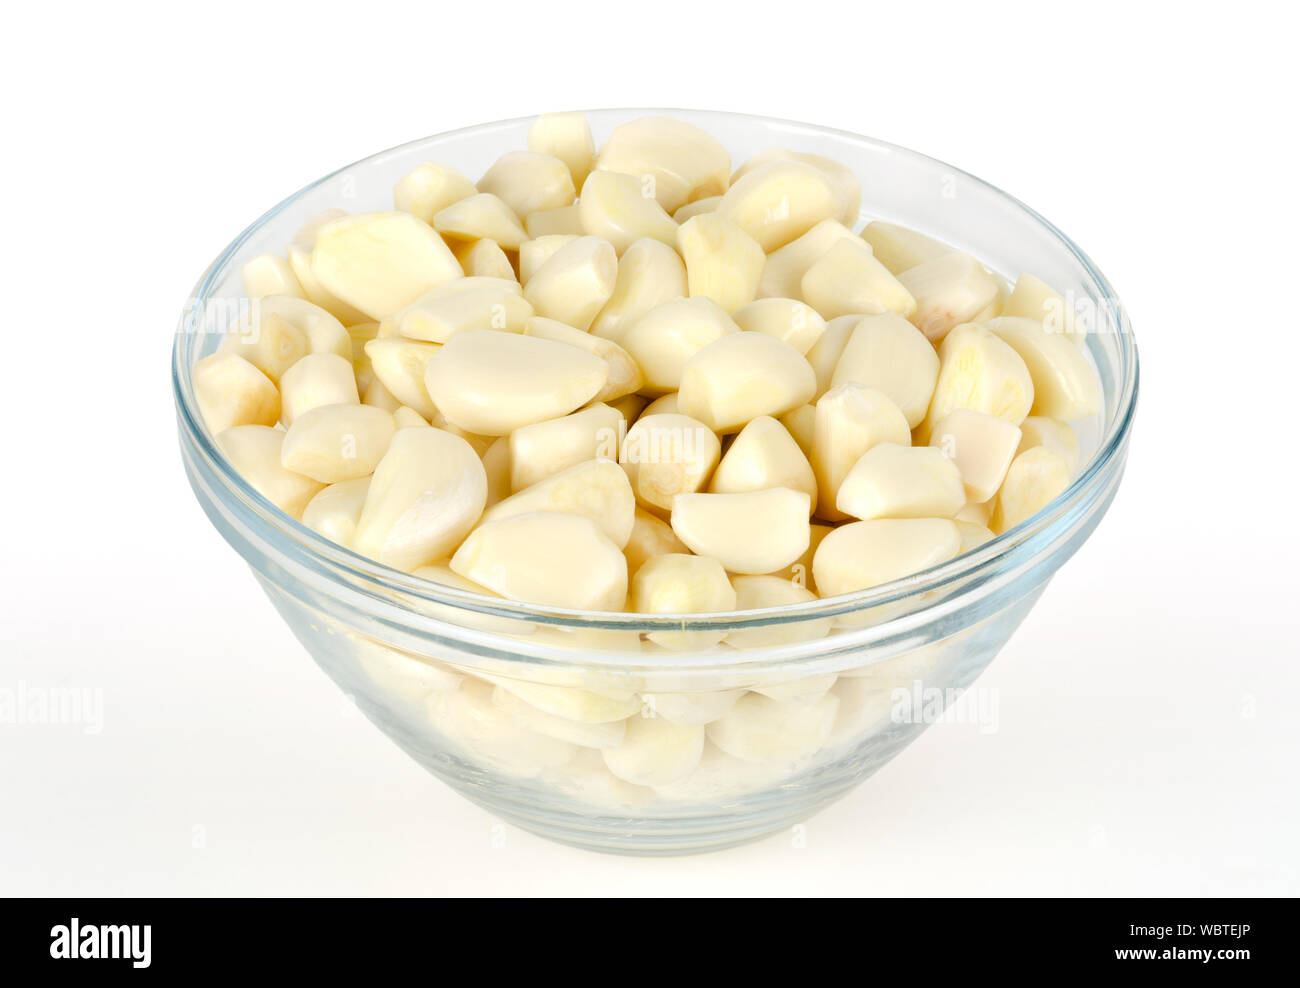 Peeled garlic cloves in glass bowl, front view. Allium sativum, with pungent flavor, used as seasoning or condiment and in medicine. Stock Photo